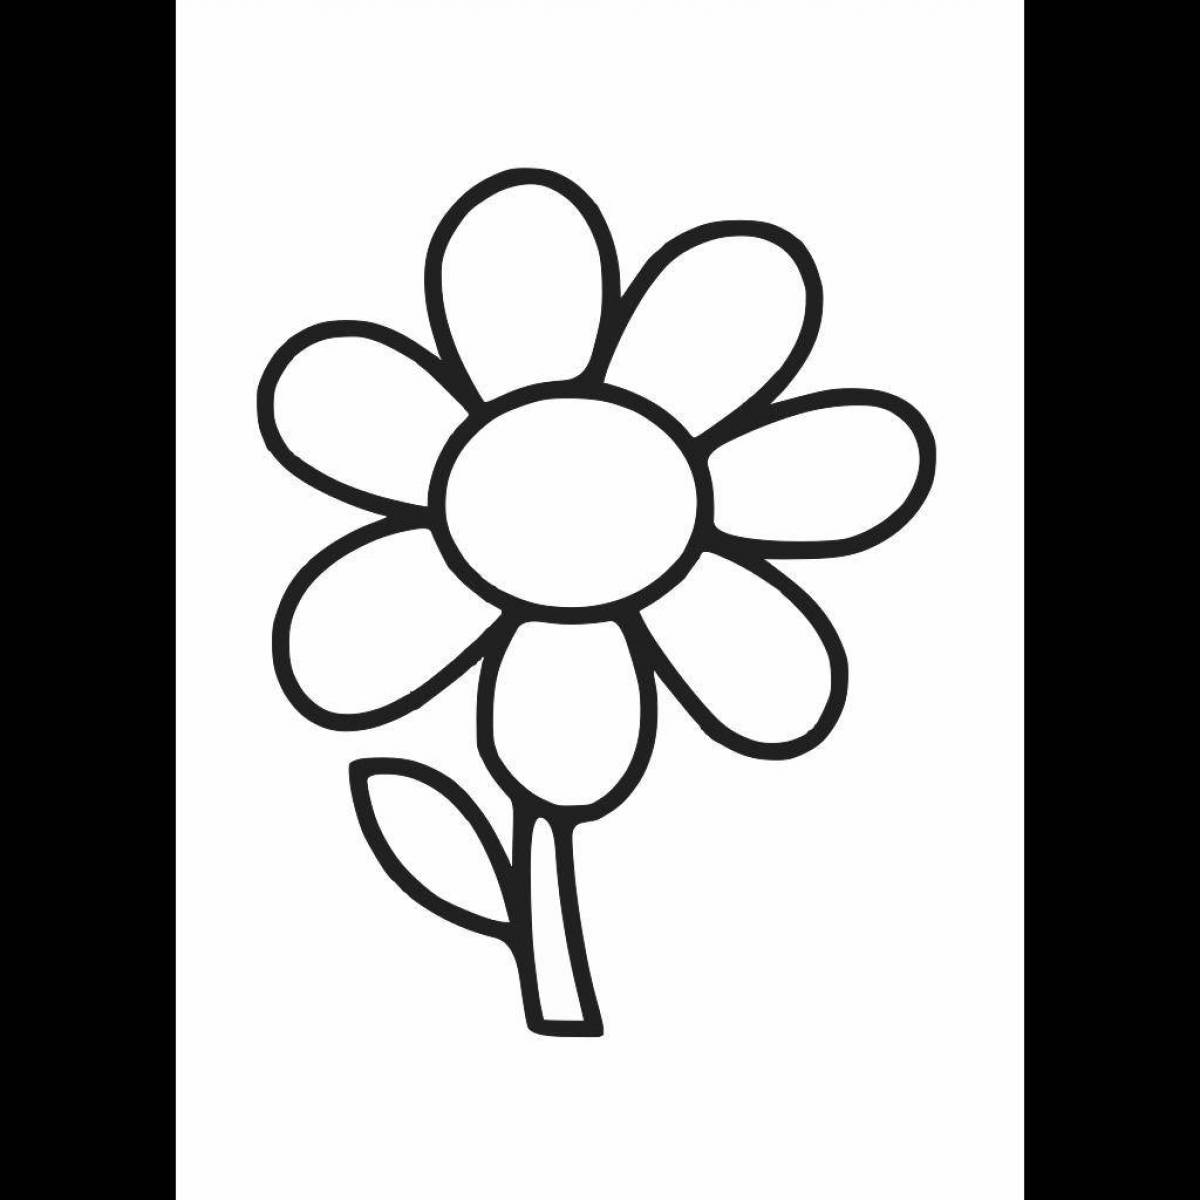 Adorable coloring book flower template with seven colors